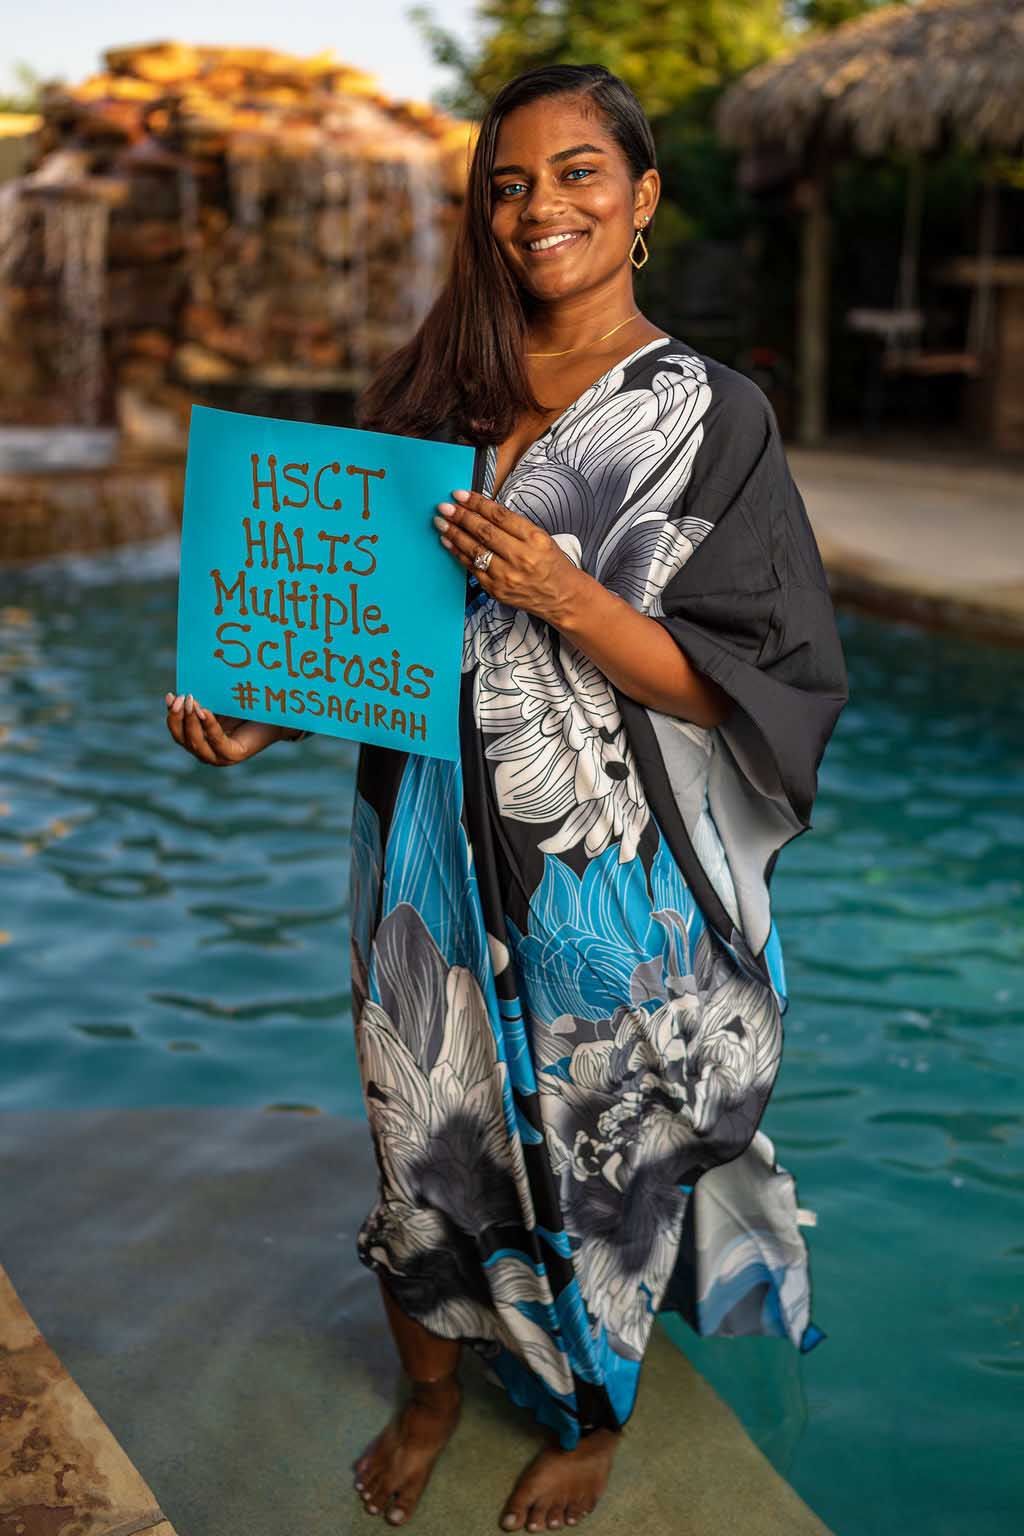 sagirah norris standing in front of a pool smiling wearing a long blue black and white dress, she carries a sign that lists her invisible disabilities